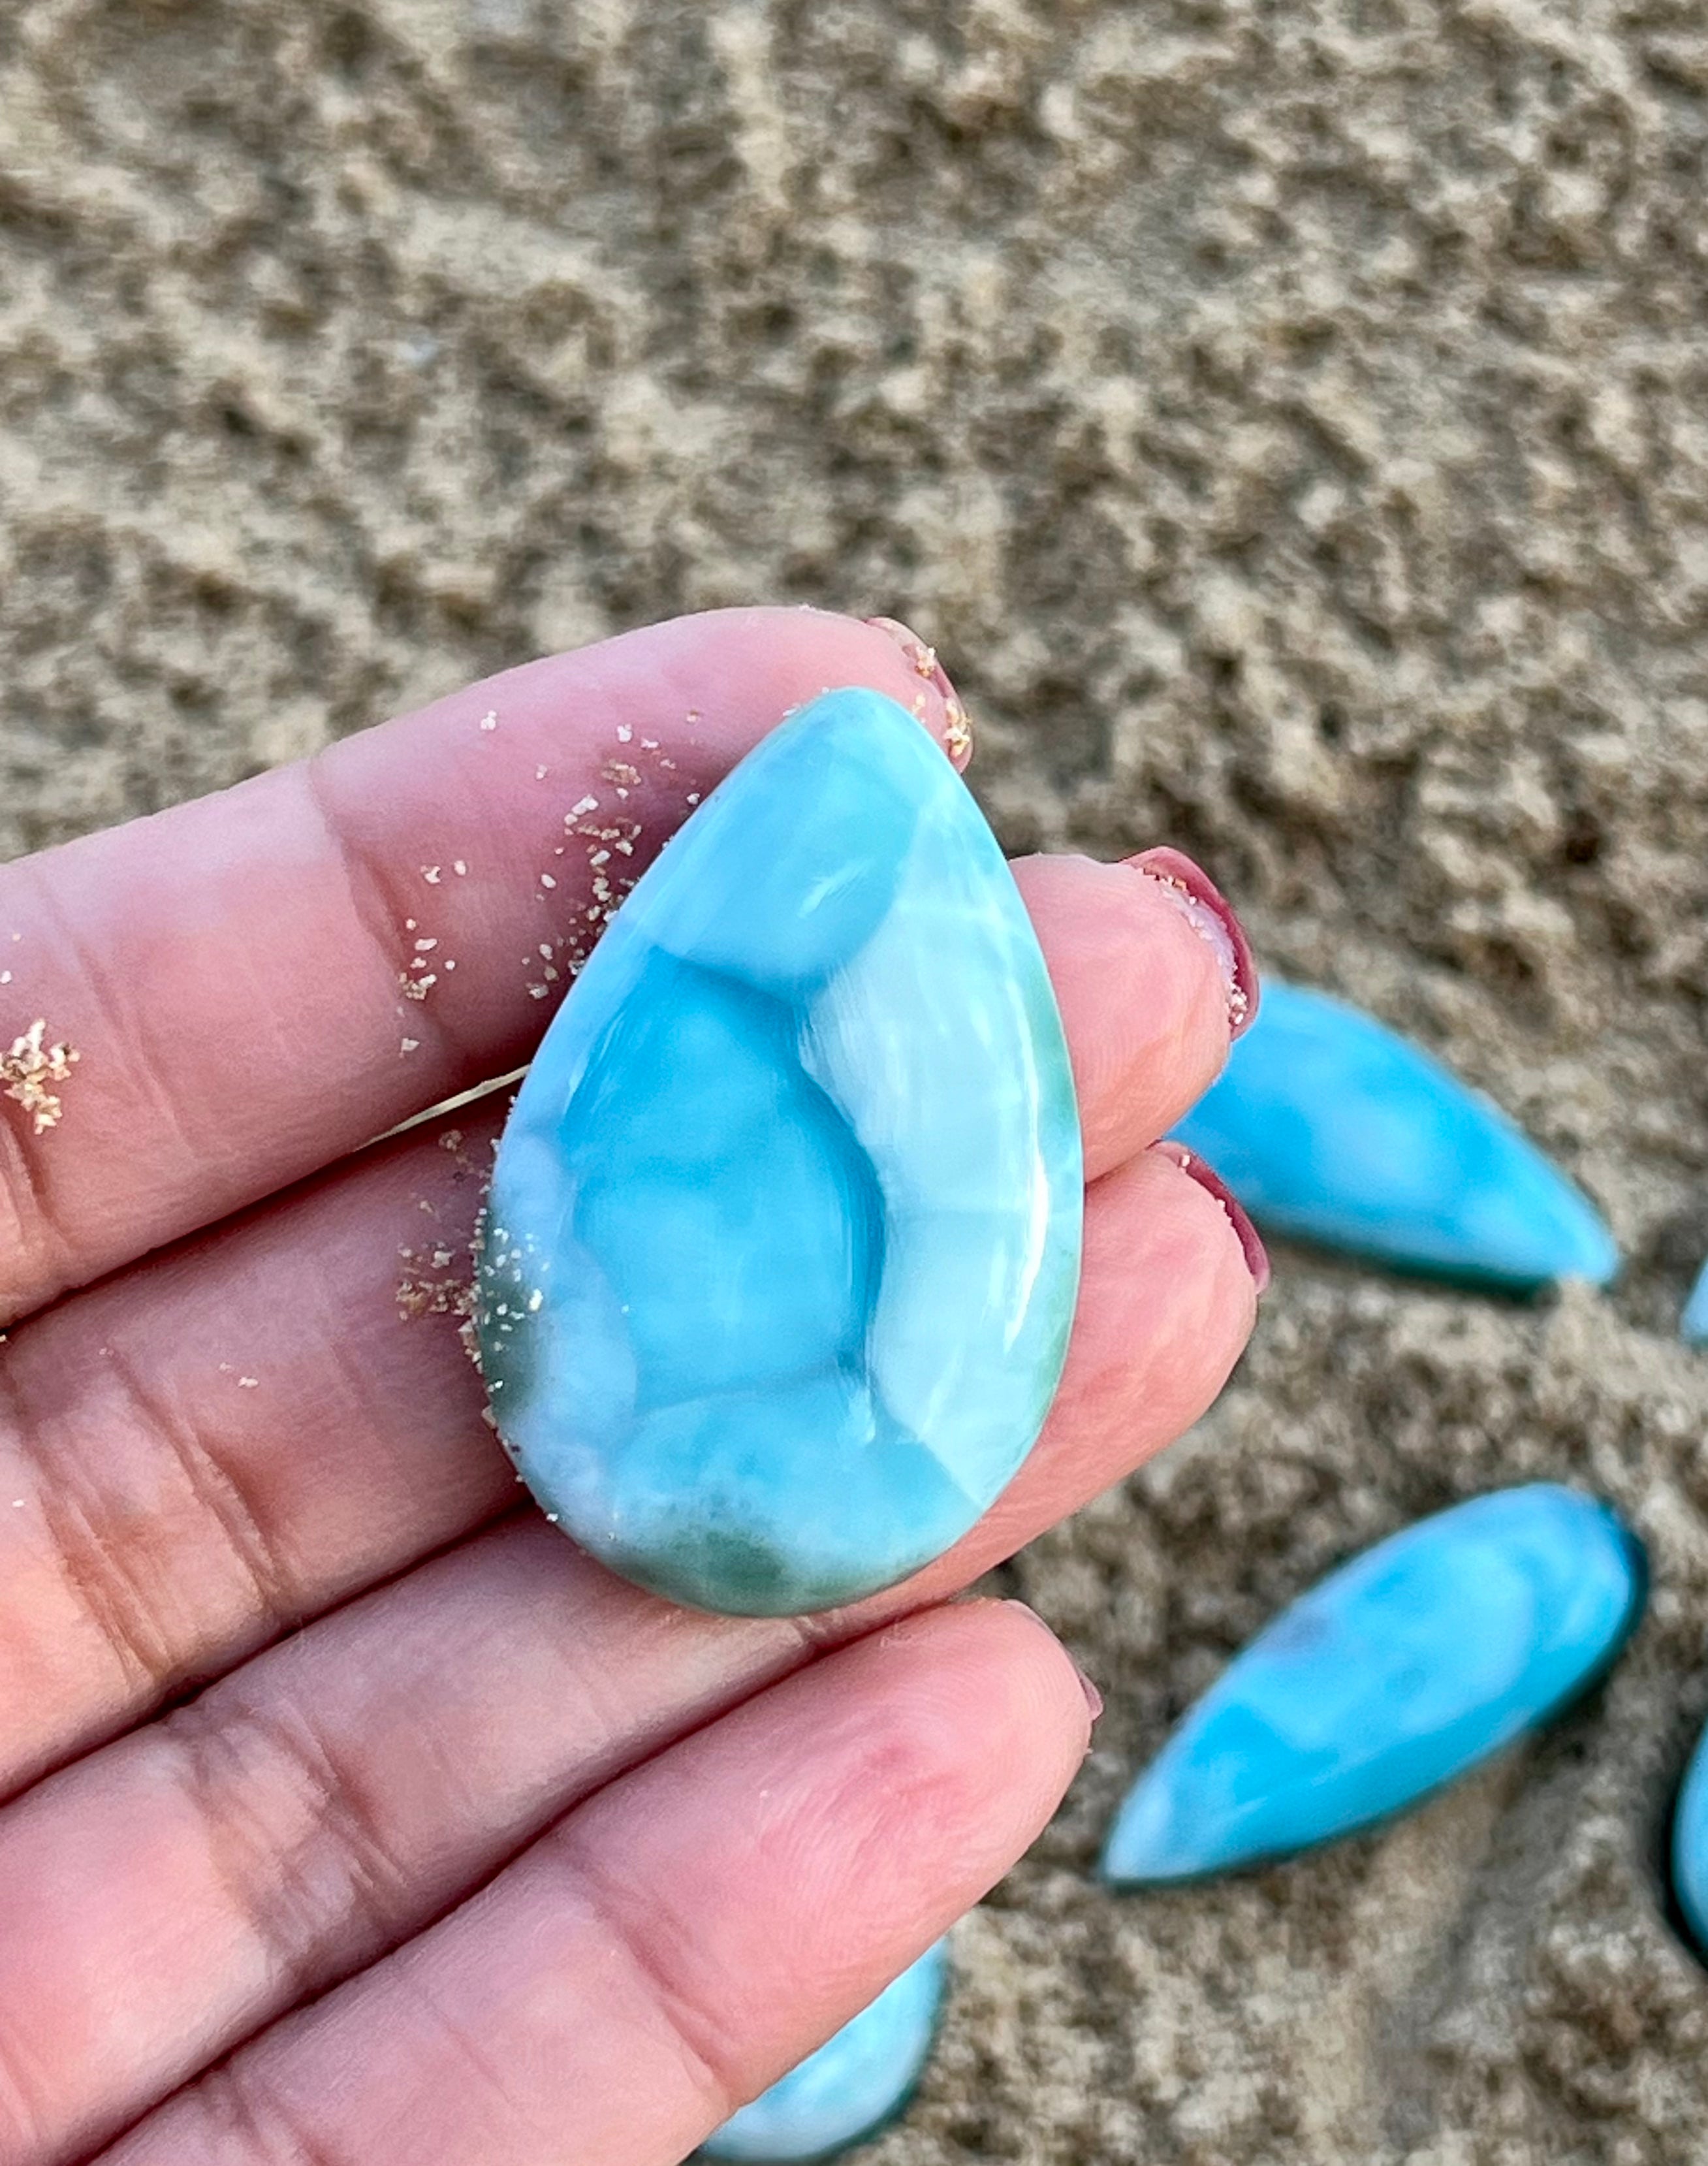 Blue Larimar rock from the Dominican Republic